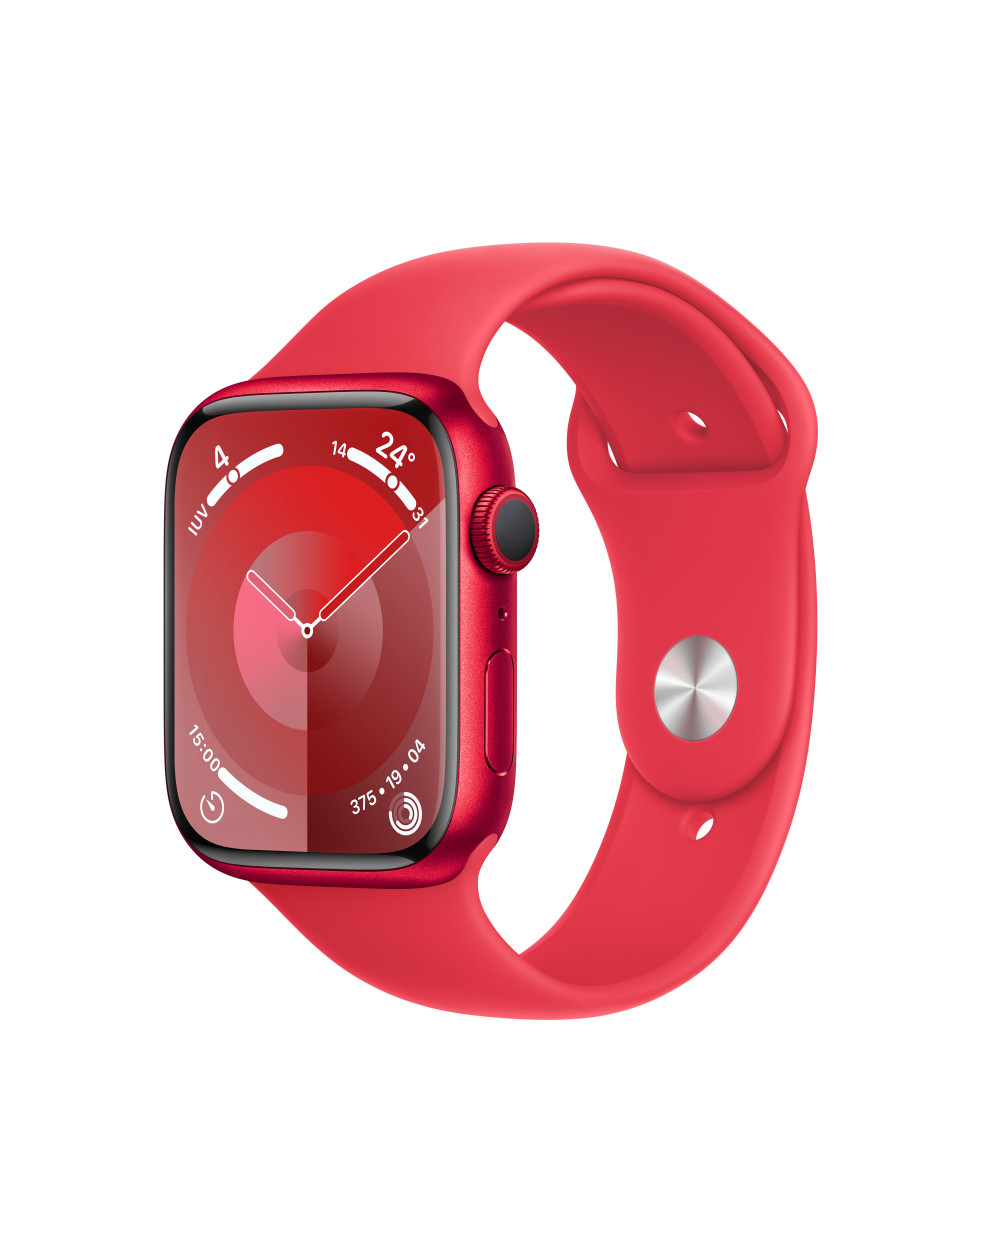 Watch Series 9 GPS 45mm (PRODUCT)RED Aluminium Case with (PRODUCT)RED Sport Band - S/M